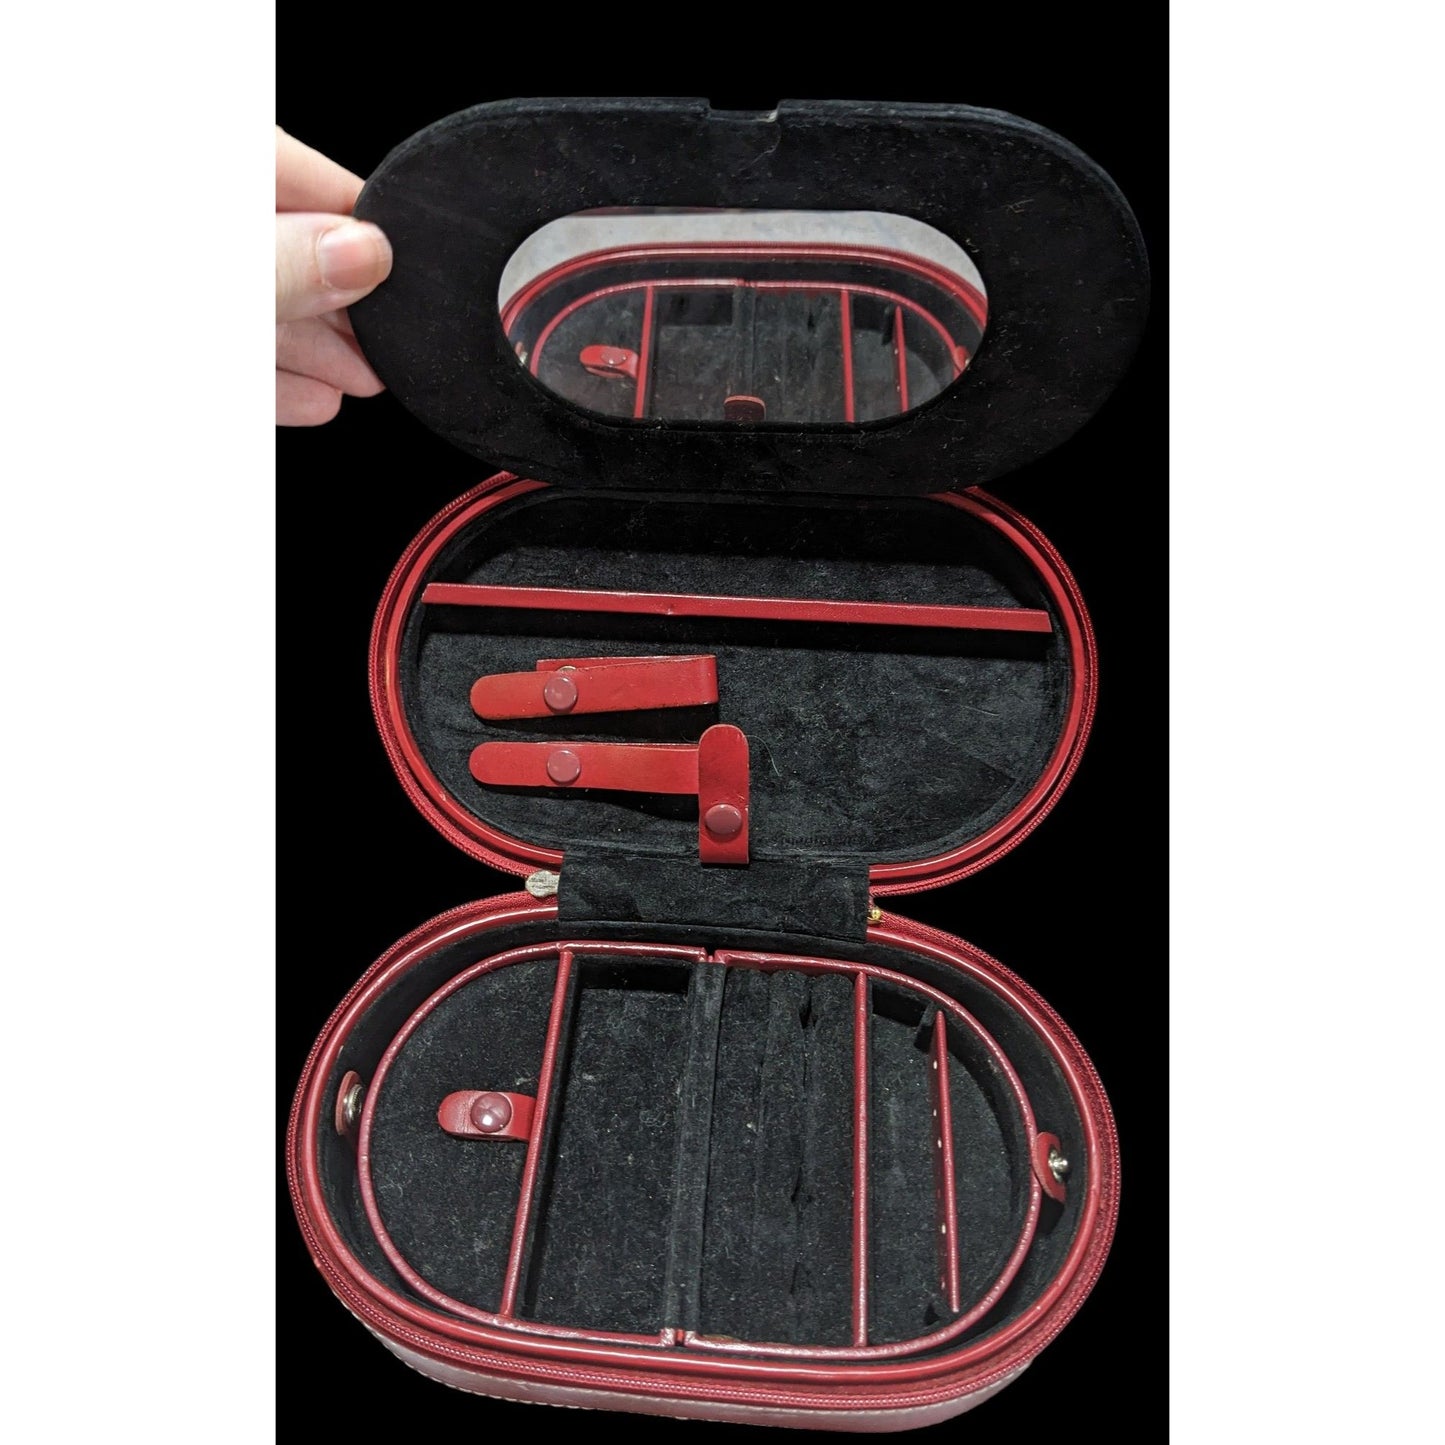 The Limited Vintage Red Jewelry Case Set